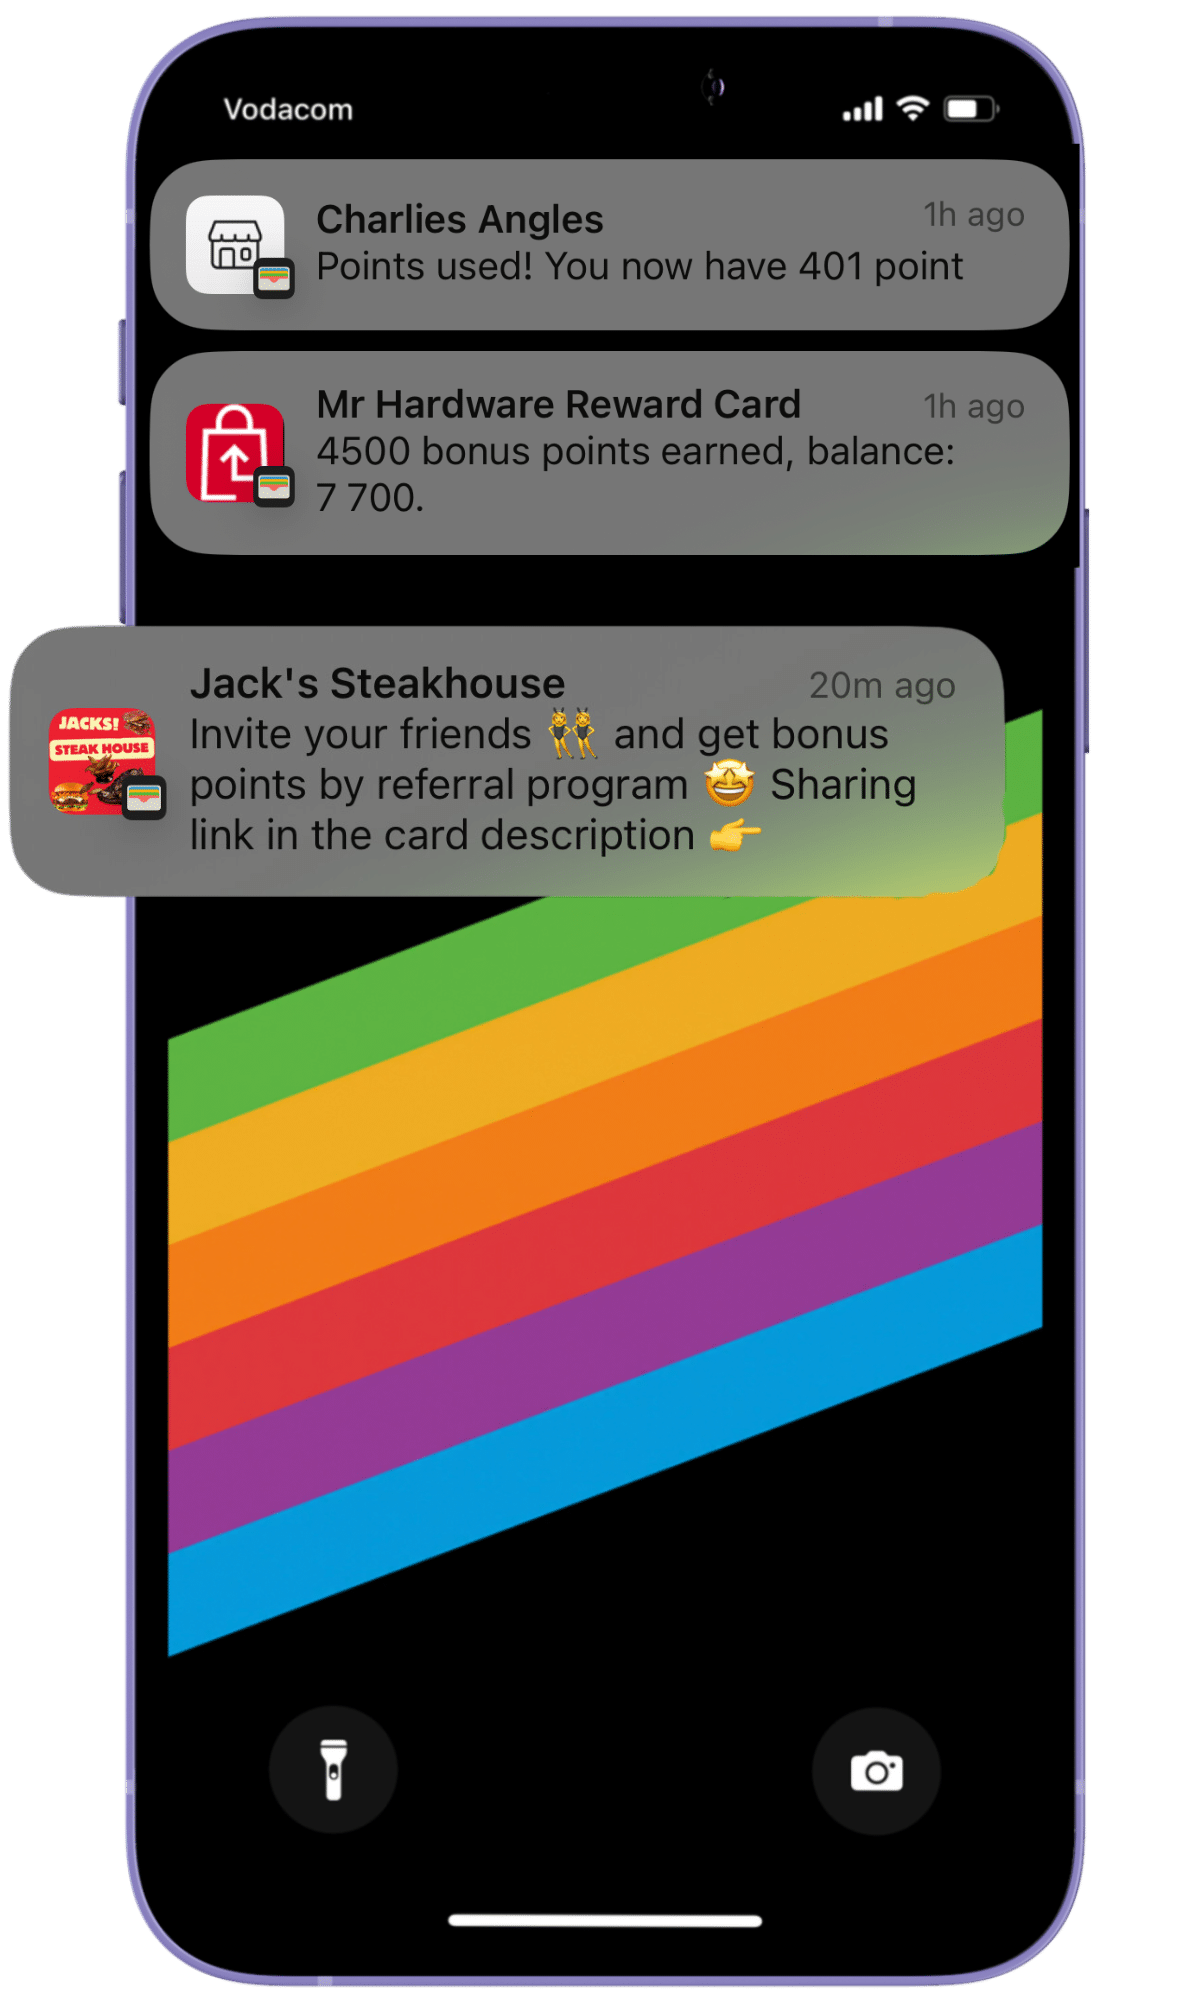 Smartphone screen displaying notification push messages from Loyaltymasters about loyalty points and a referral reward.